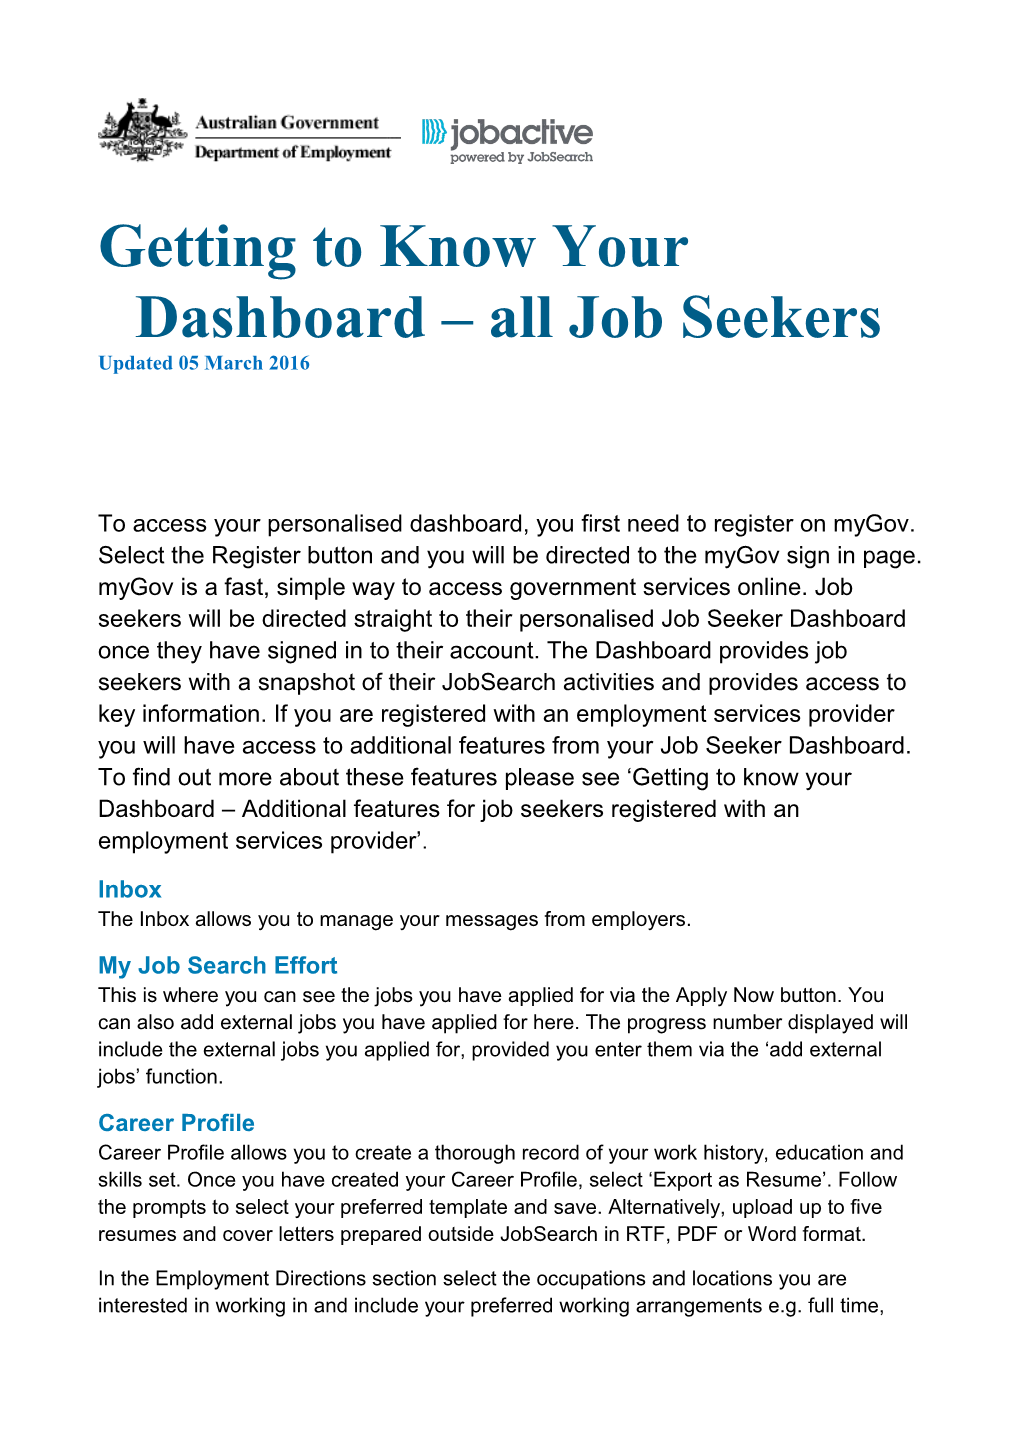 Getting to Know Your Dashboard All Job Seekers